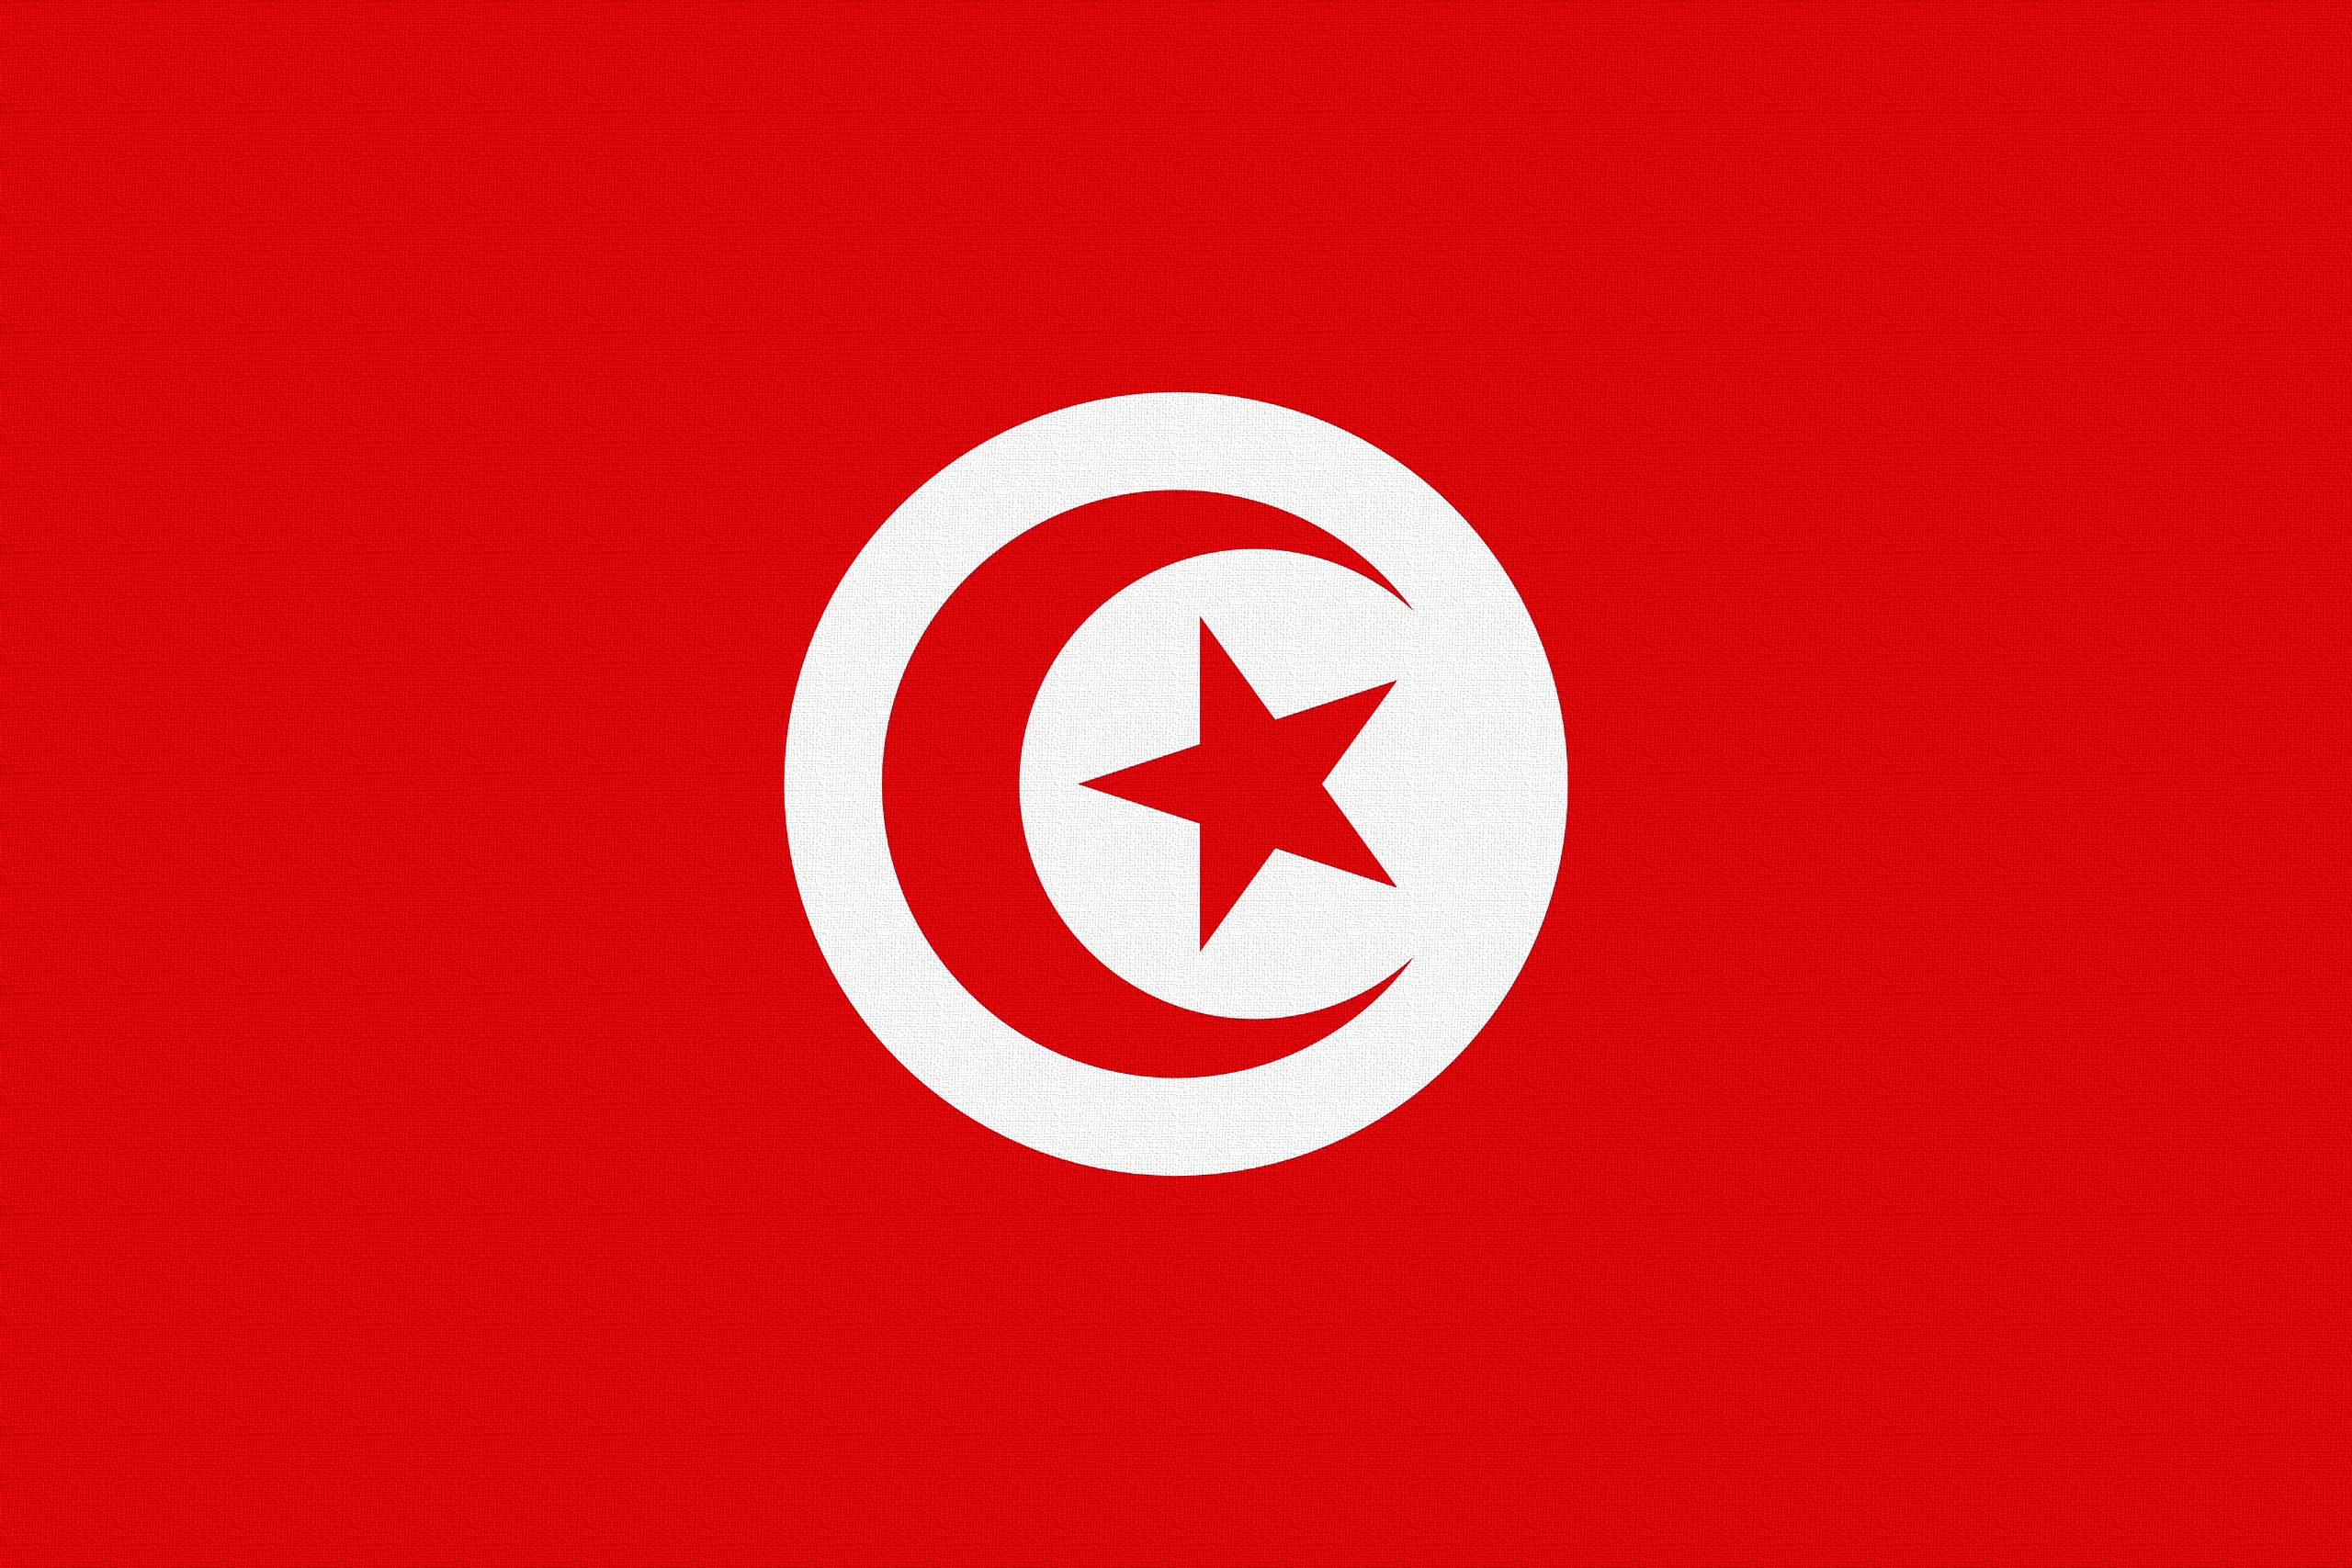 73965 2560x1080 PC pictures for free, download tunisia, star, miscellaneous, symbolism 2560x1080 wallpapers on your desktop